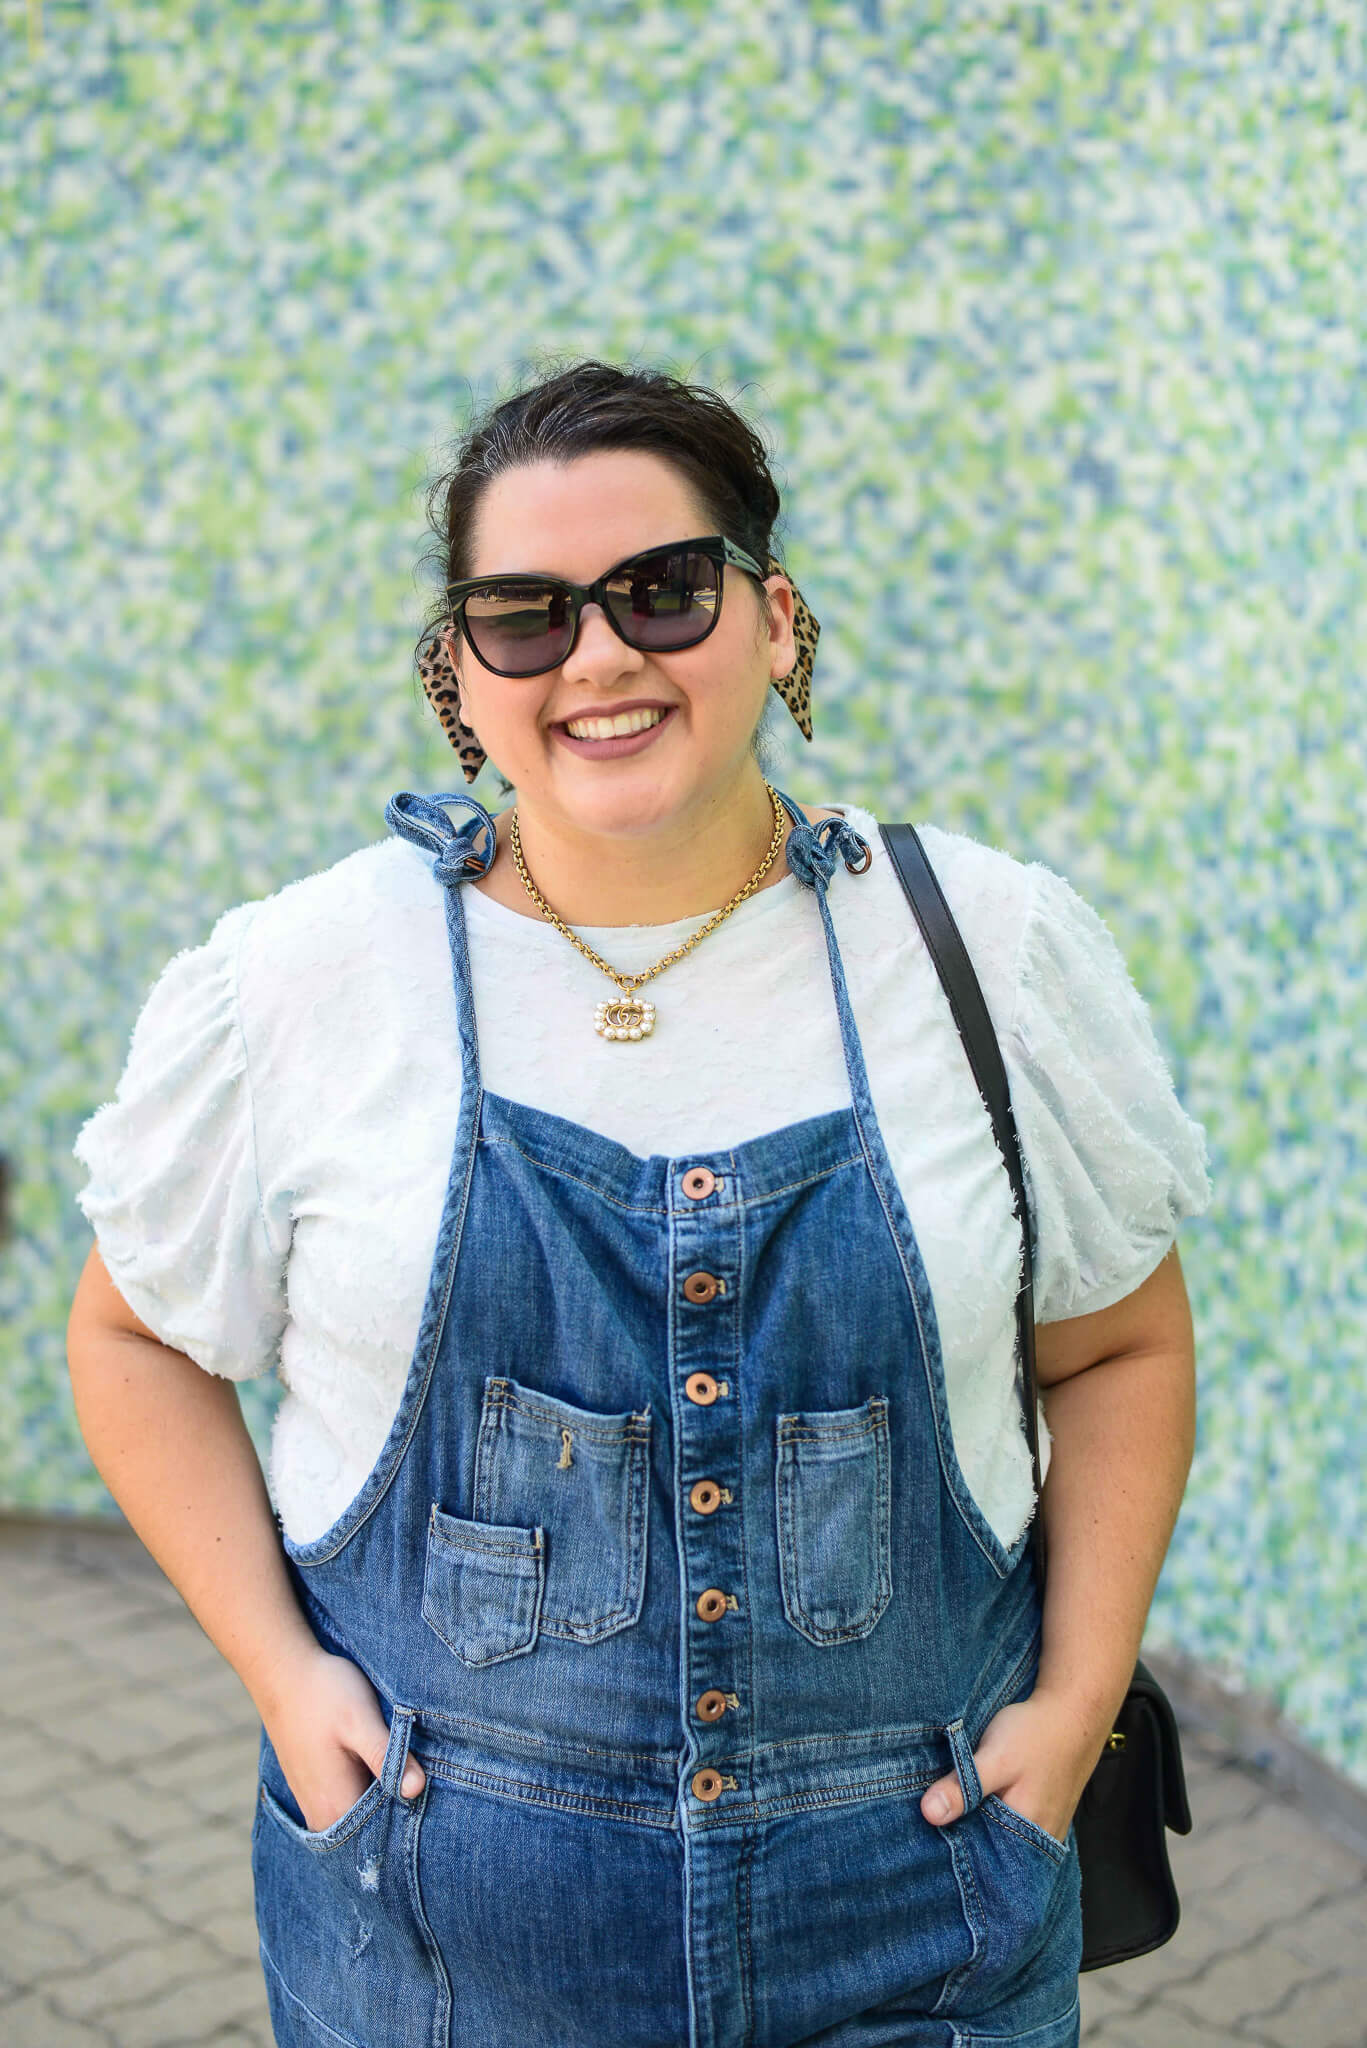 Feeling like a 90s baby in these overalls, a statement necklace and a gorgeous scrunchy